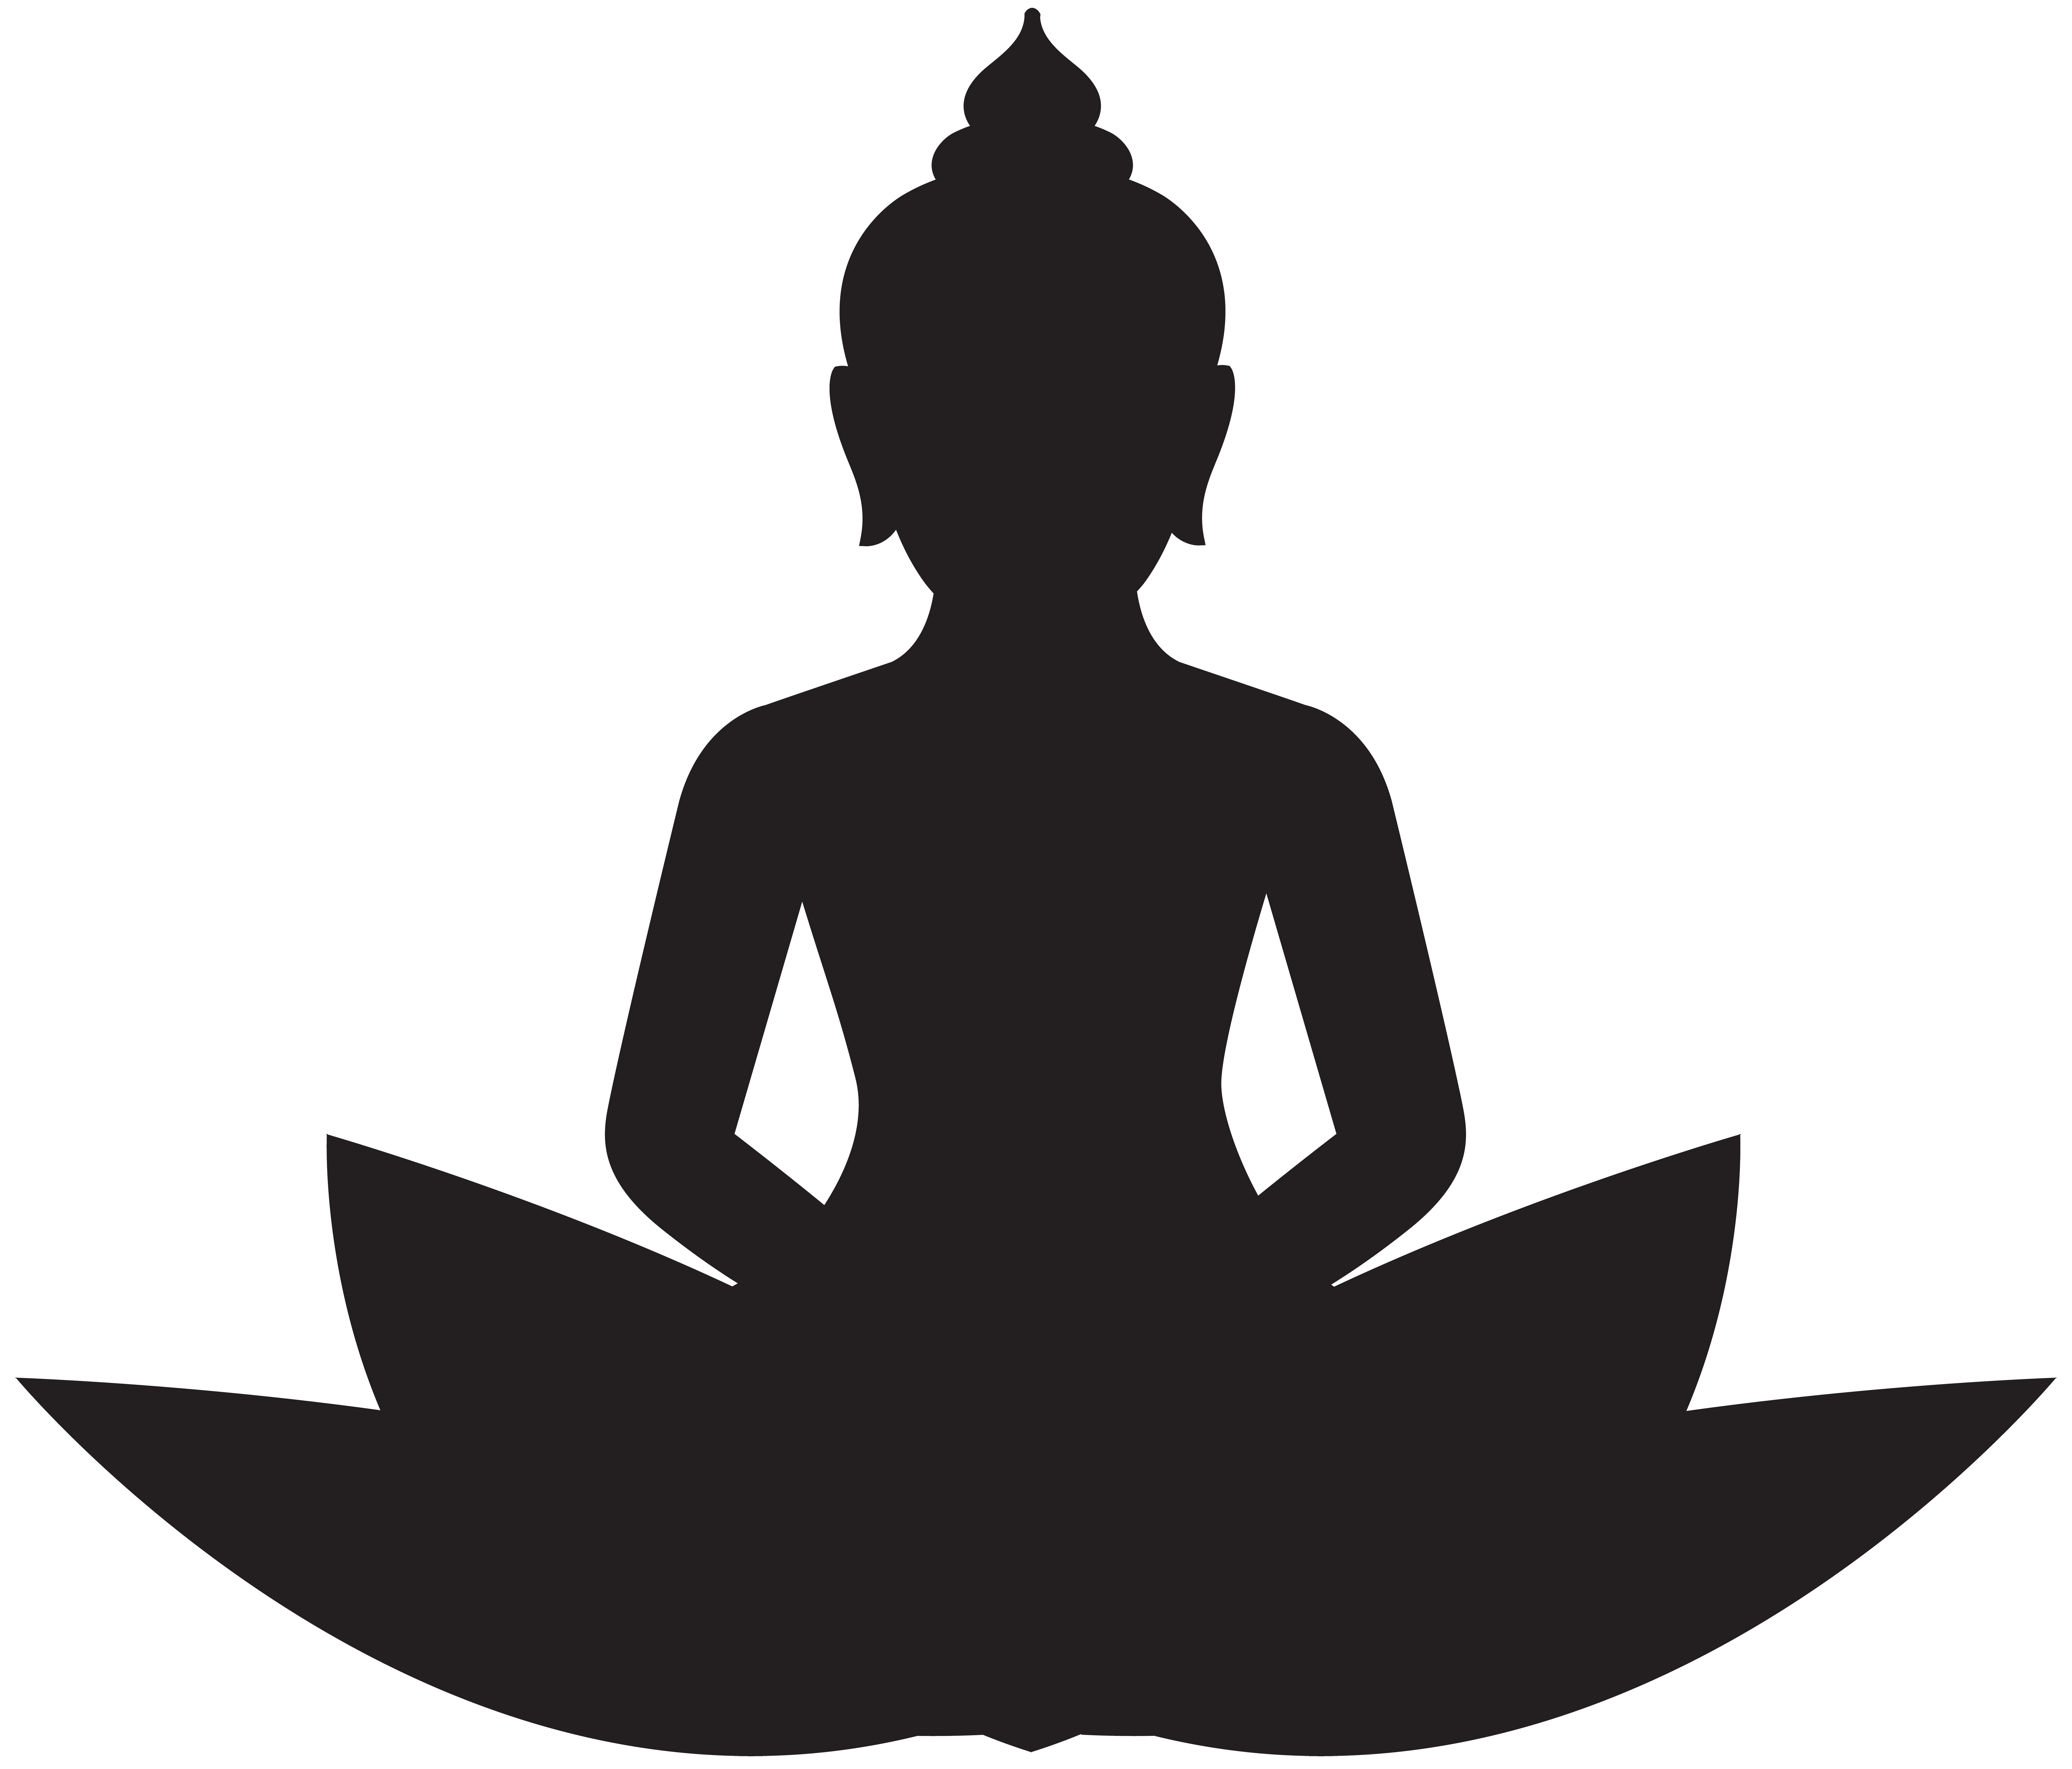 Meditating Buddha Silhouette PNG Clip Art | Gallery Yopriceville ...